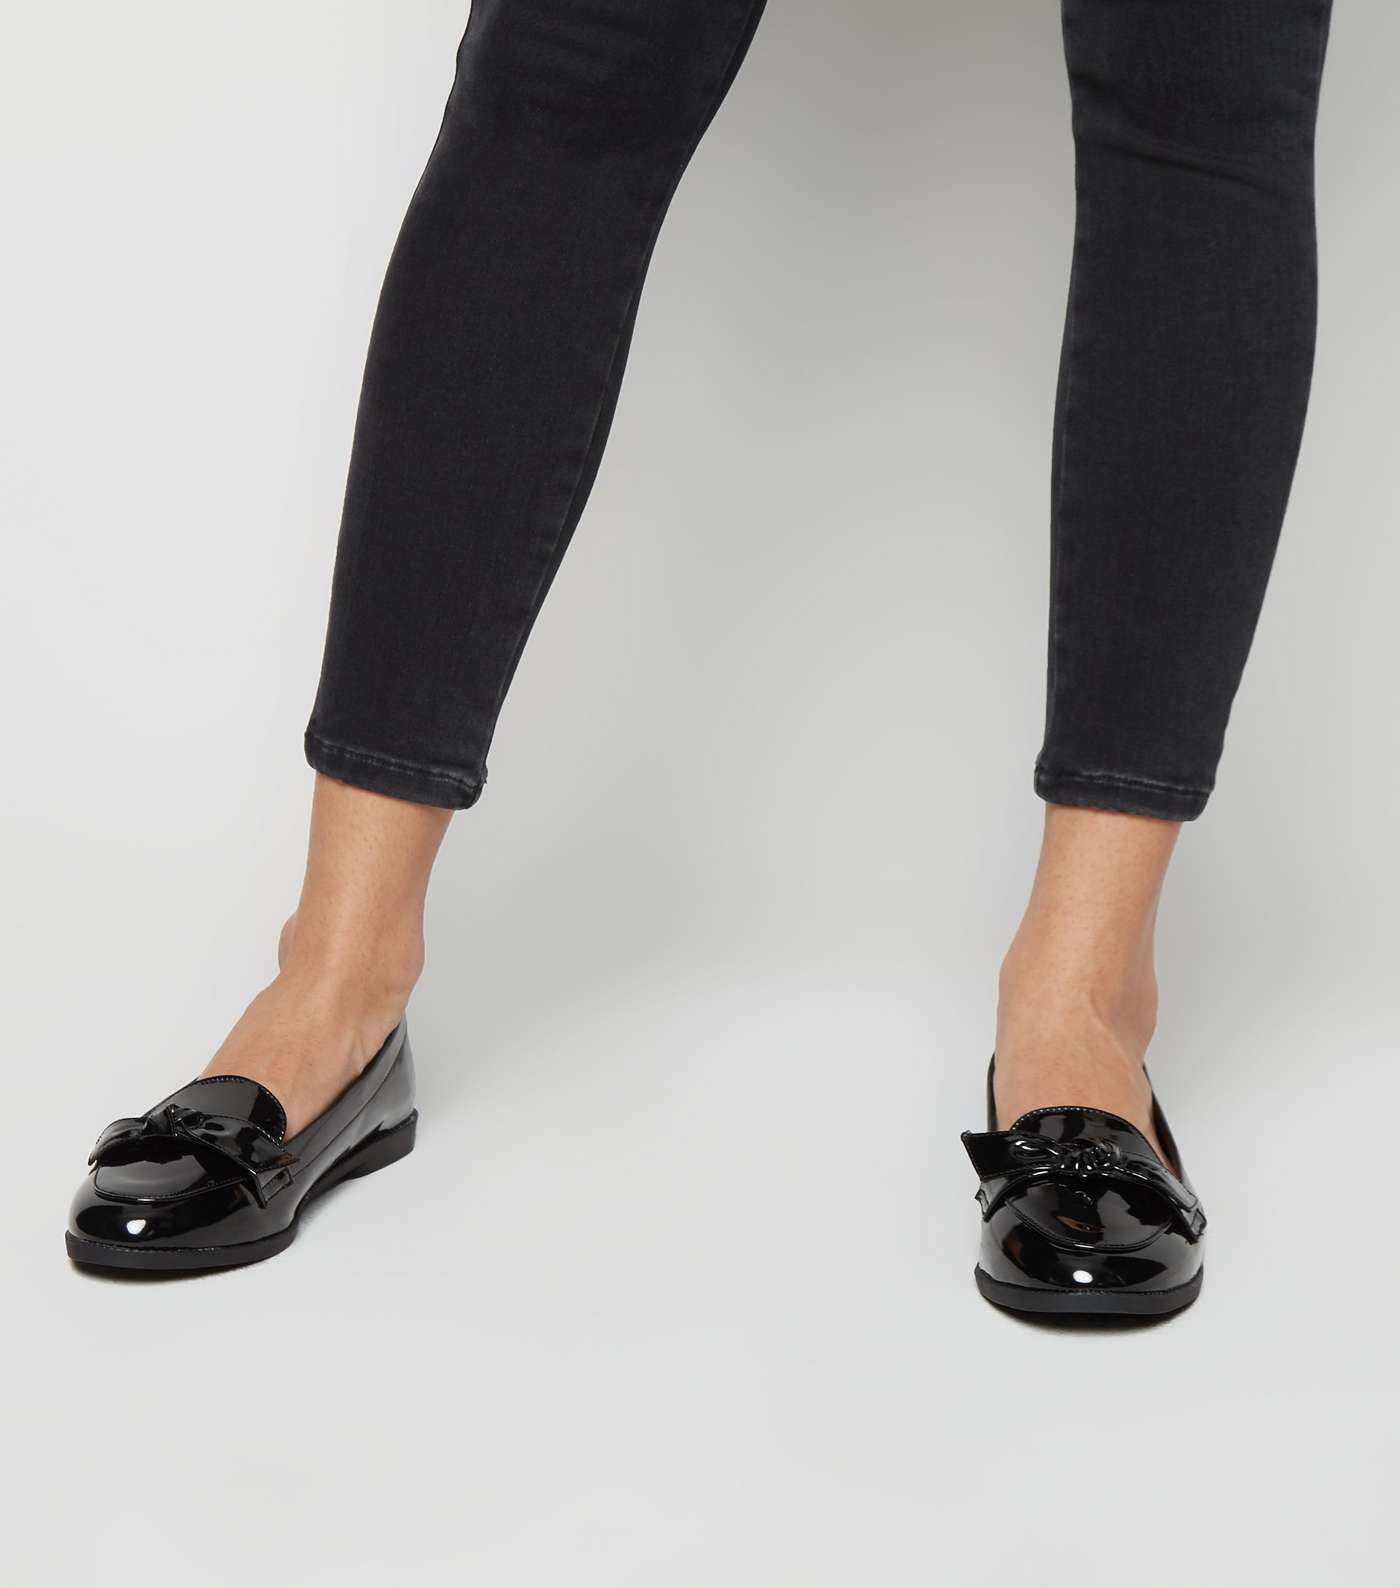 Wide Fit Black Patent Bow Loafers Image 2